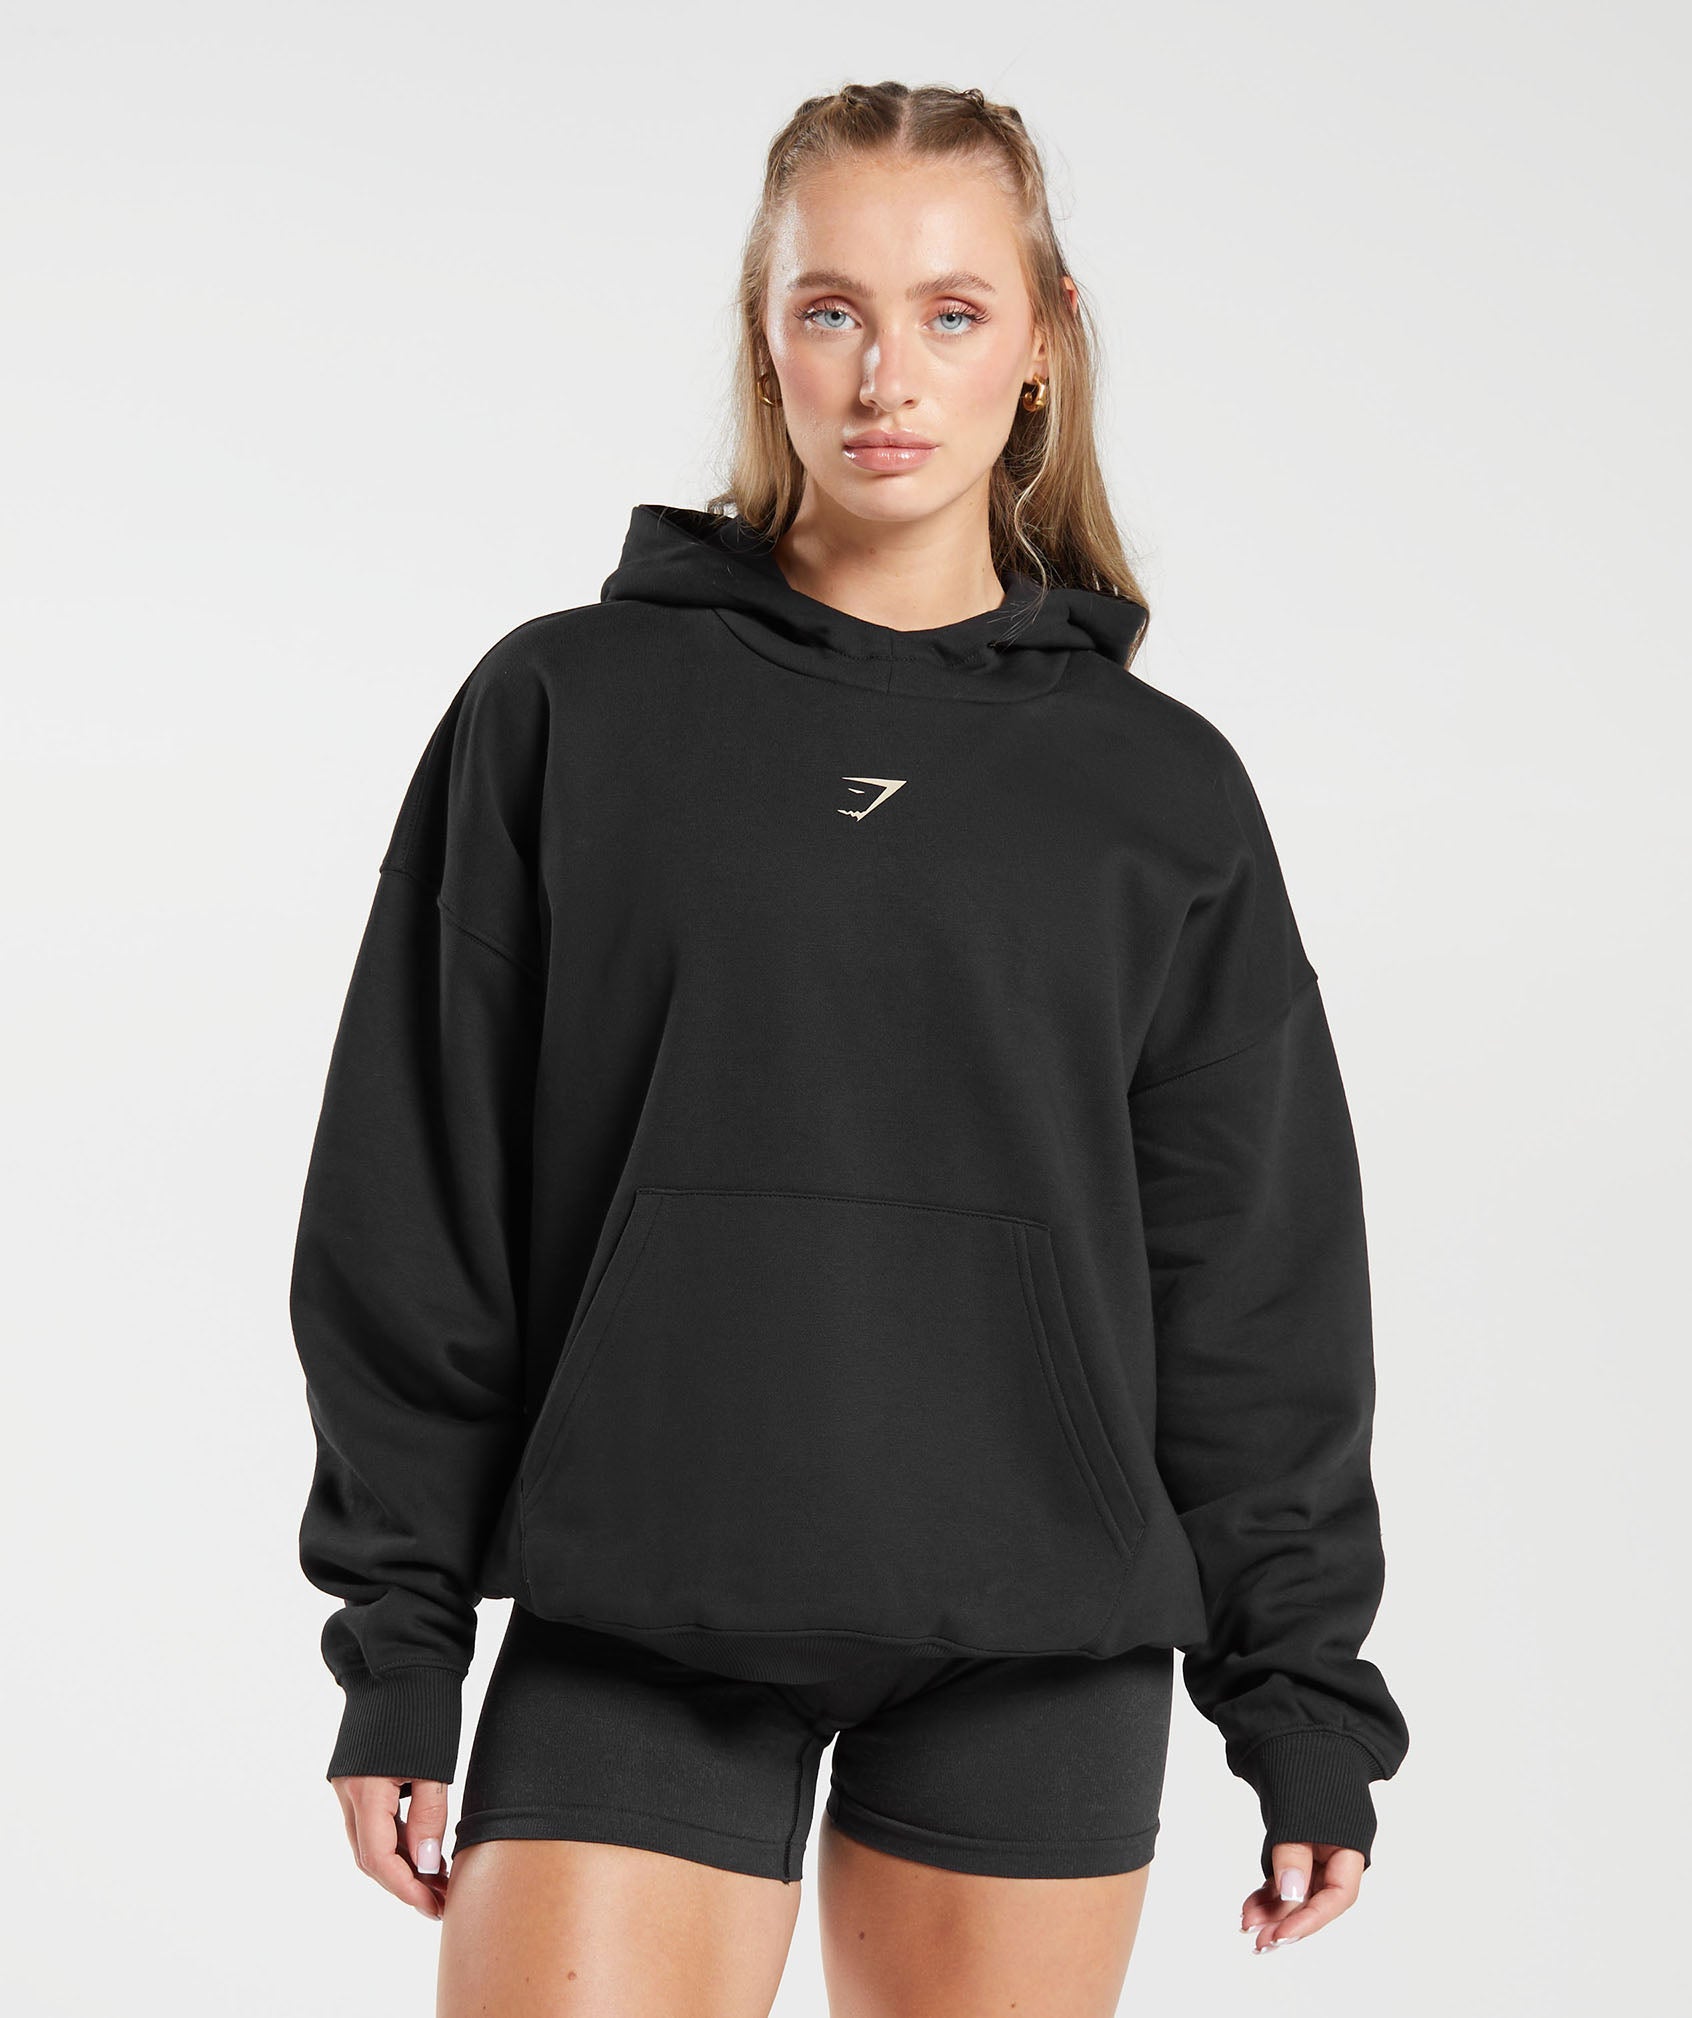 Committed To The Craft Hoodie in Black - view 2